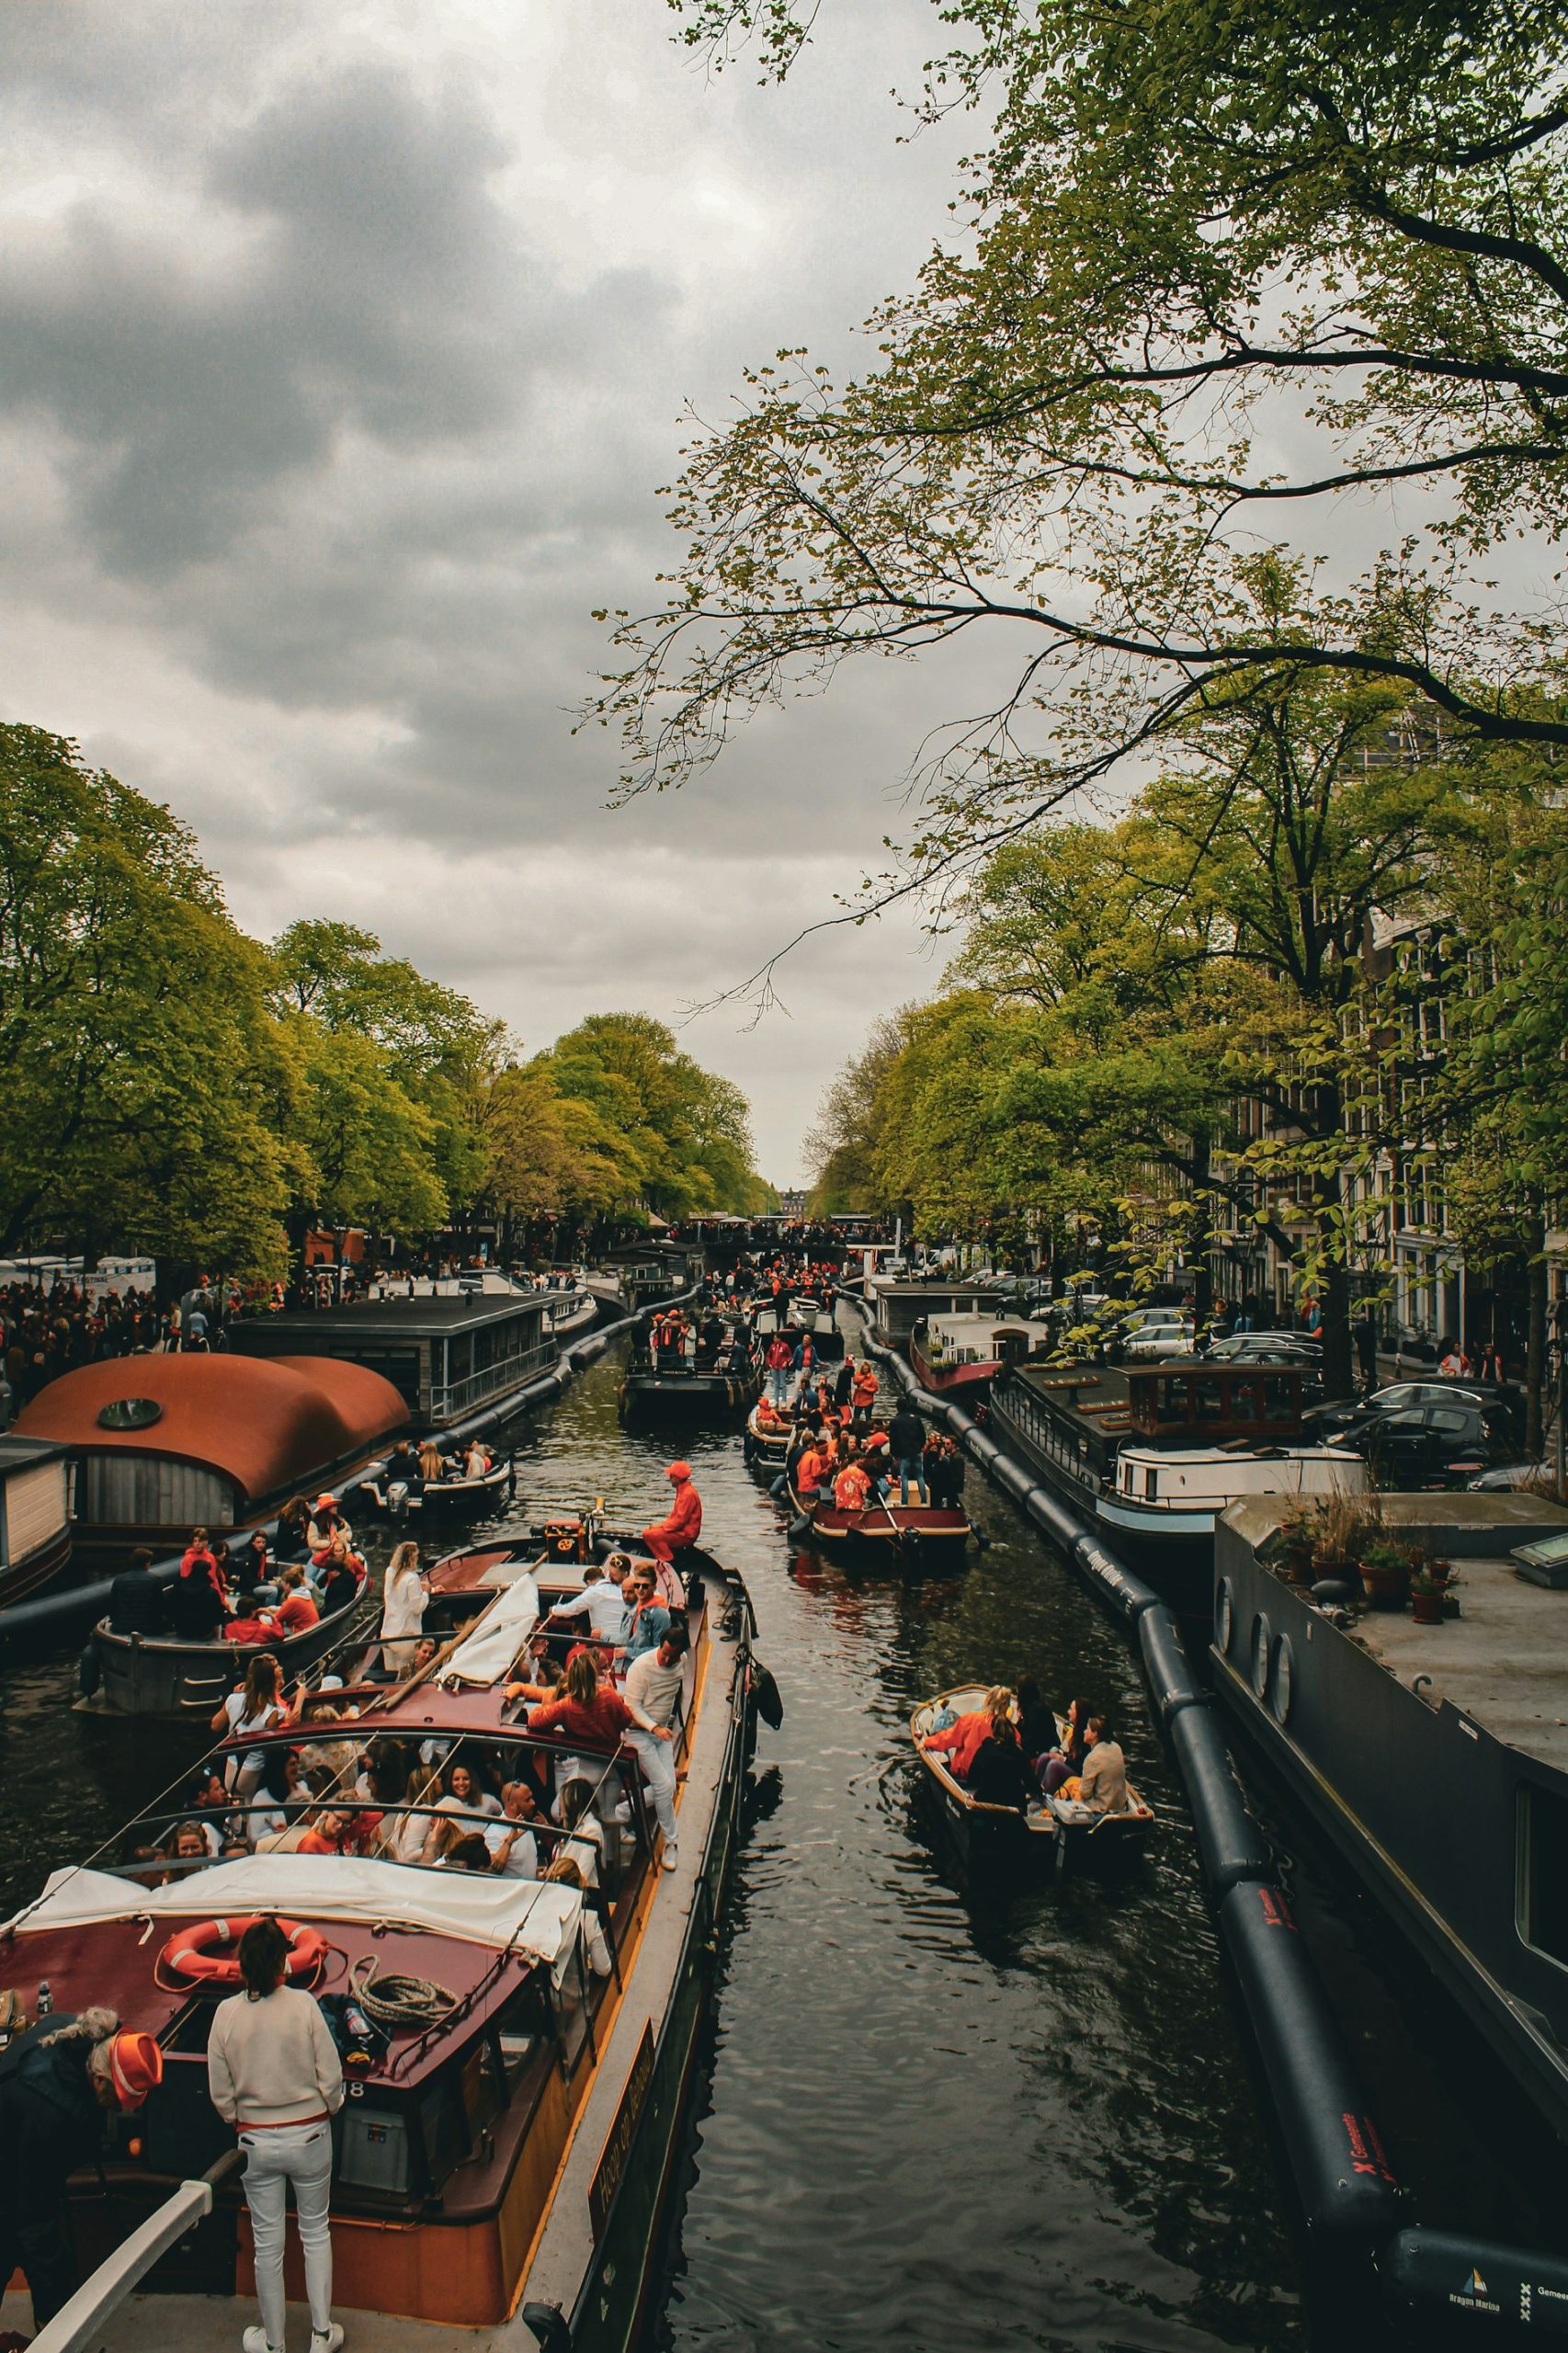 A View of boats in the canals during Amsterdam's King's Day.